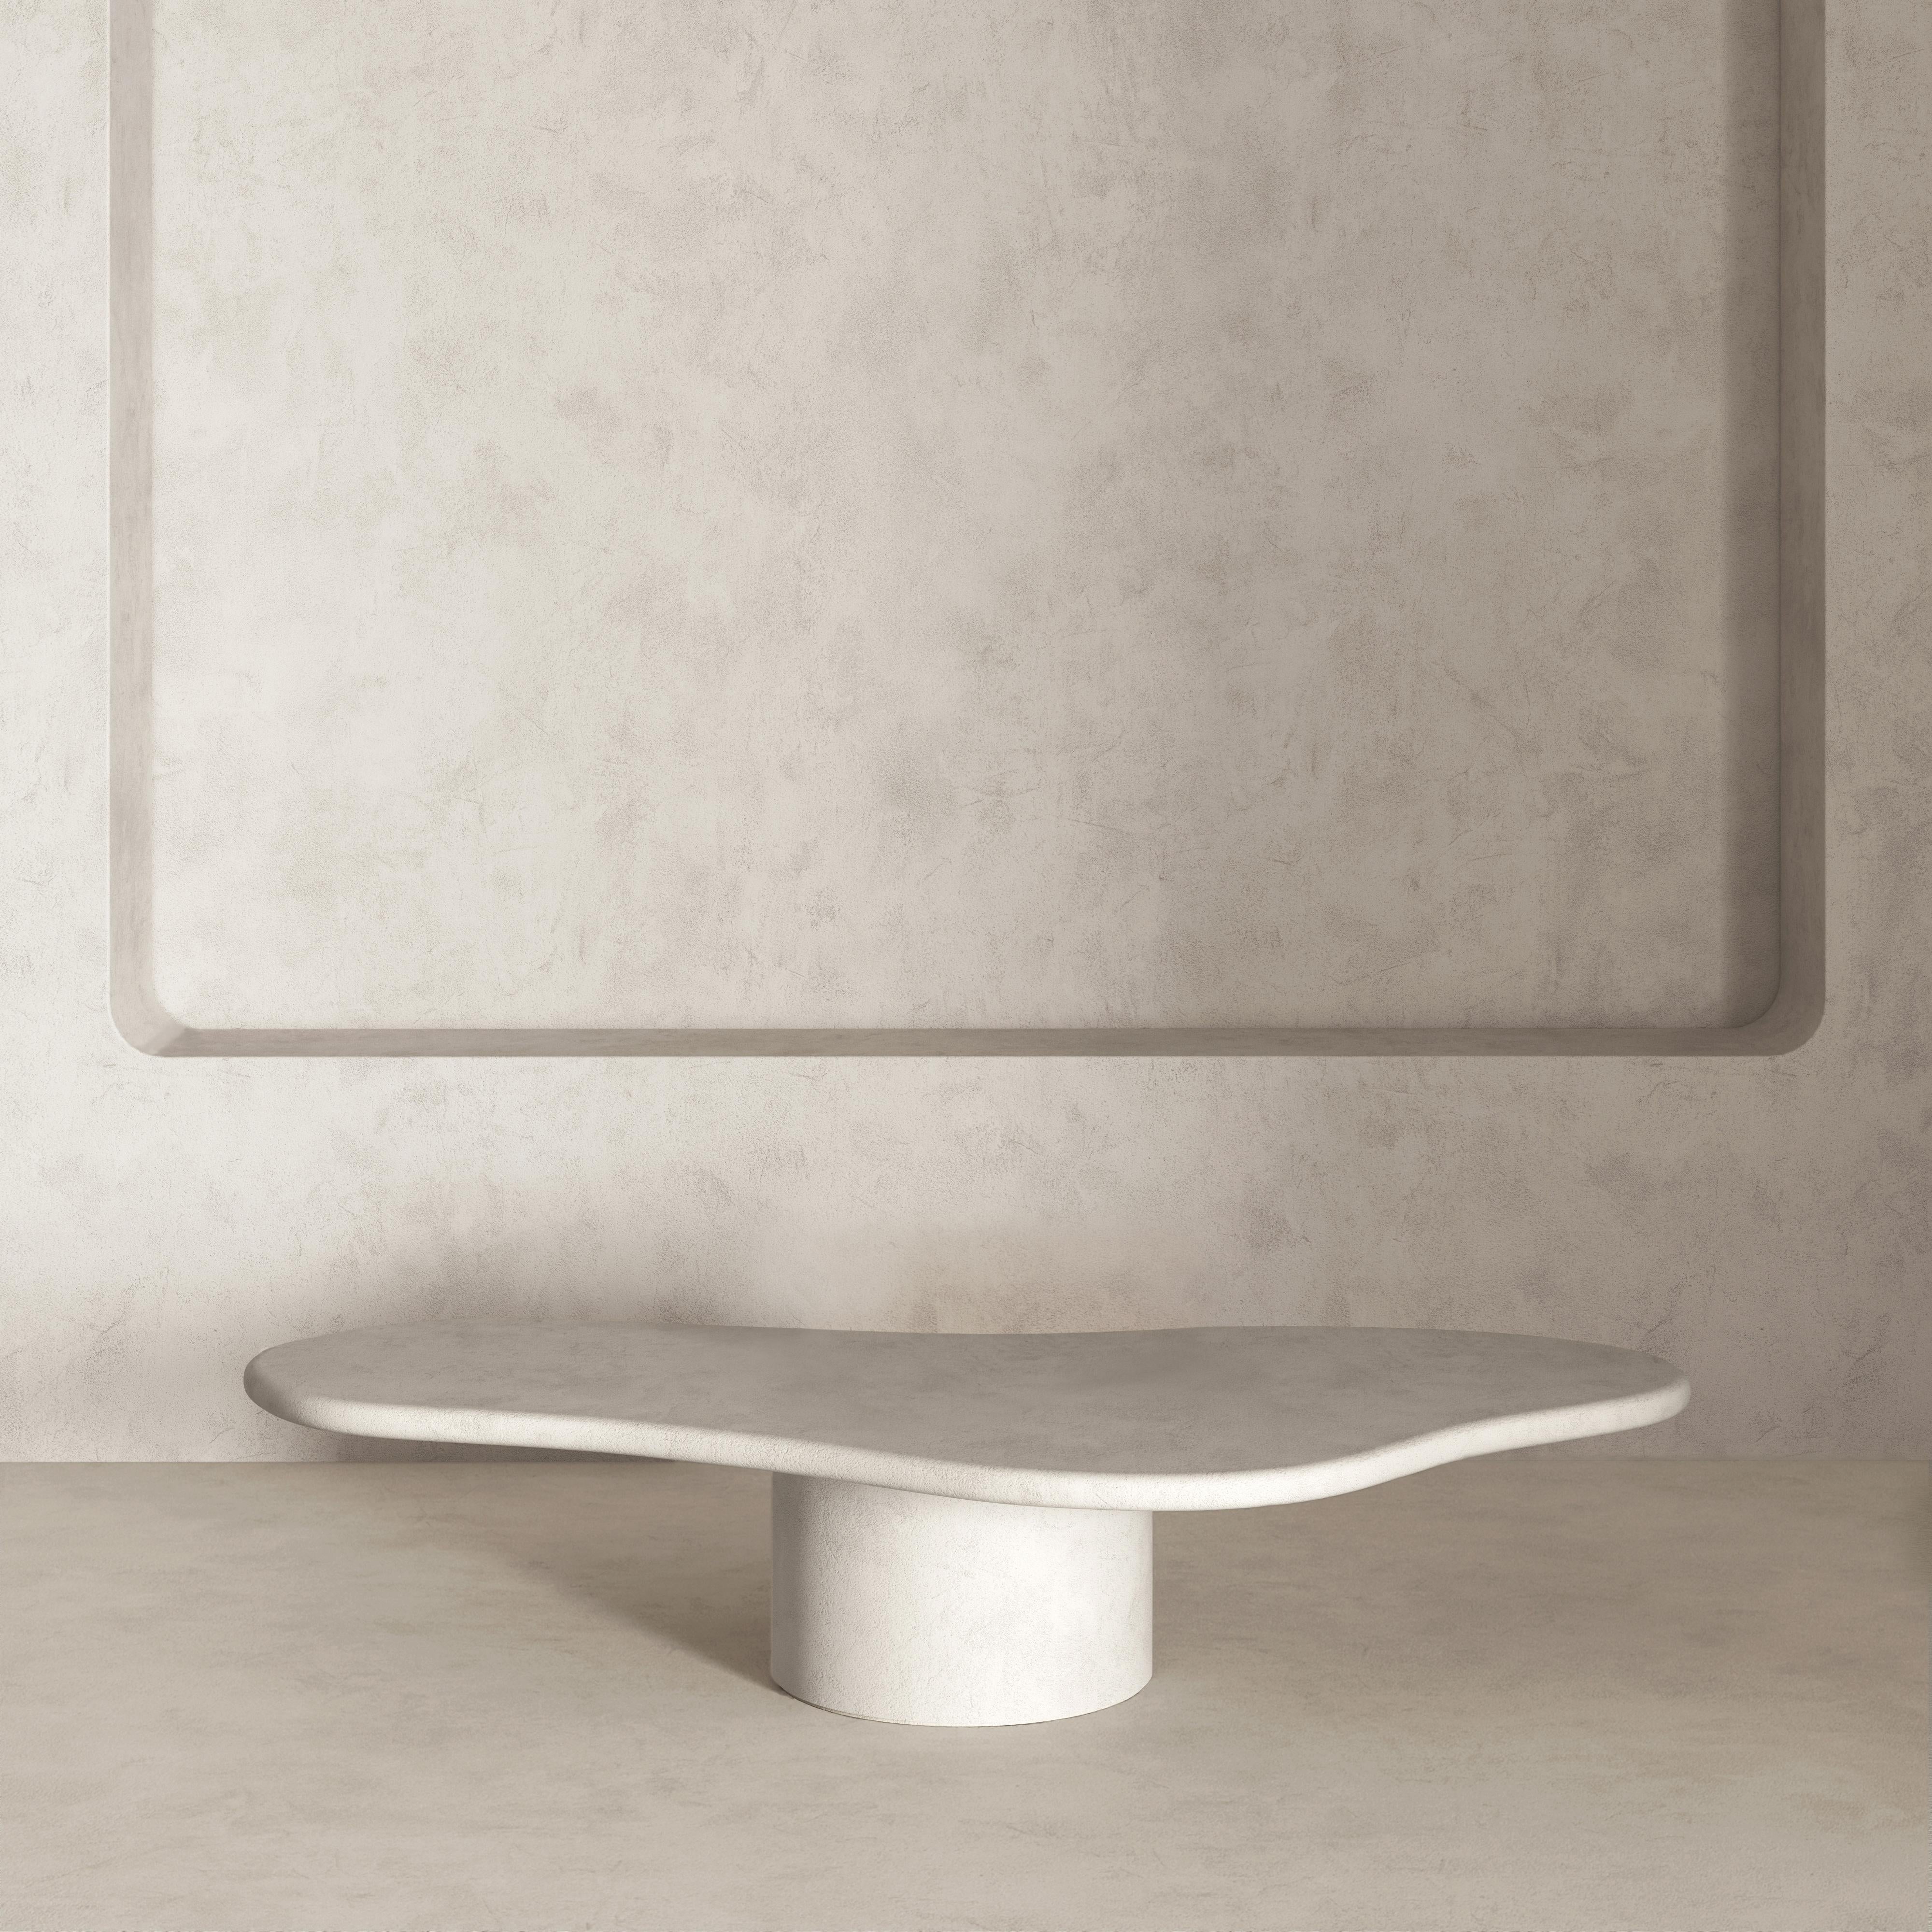 Akemi Low Table by Kasanai
Dimensions: D 79 x W 160 x H 30 cm.
Materials: Lime plaster.
Also available in different dimensions and colors. Please contact us.

At once fluid and structured, the Akemi table is an artistic talking point for any modern